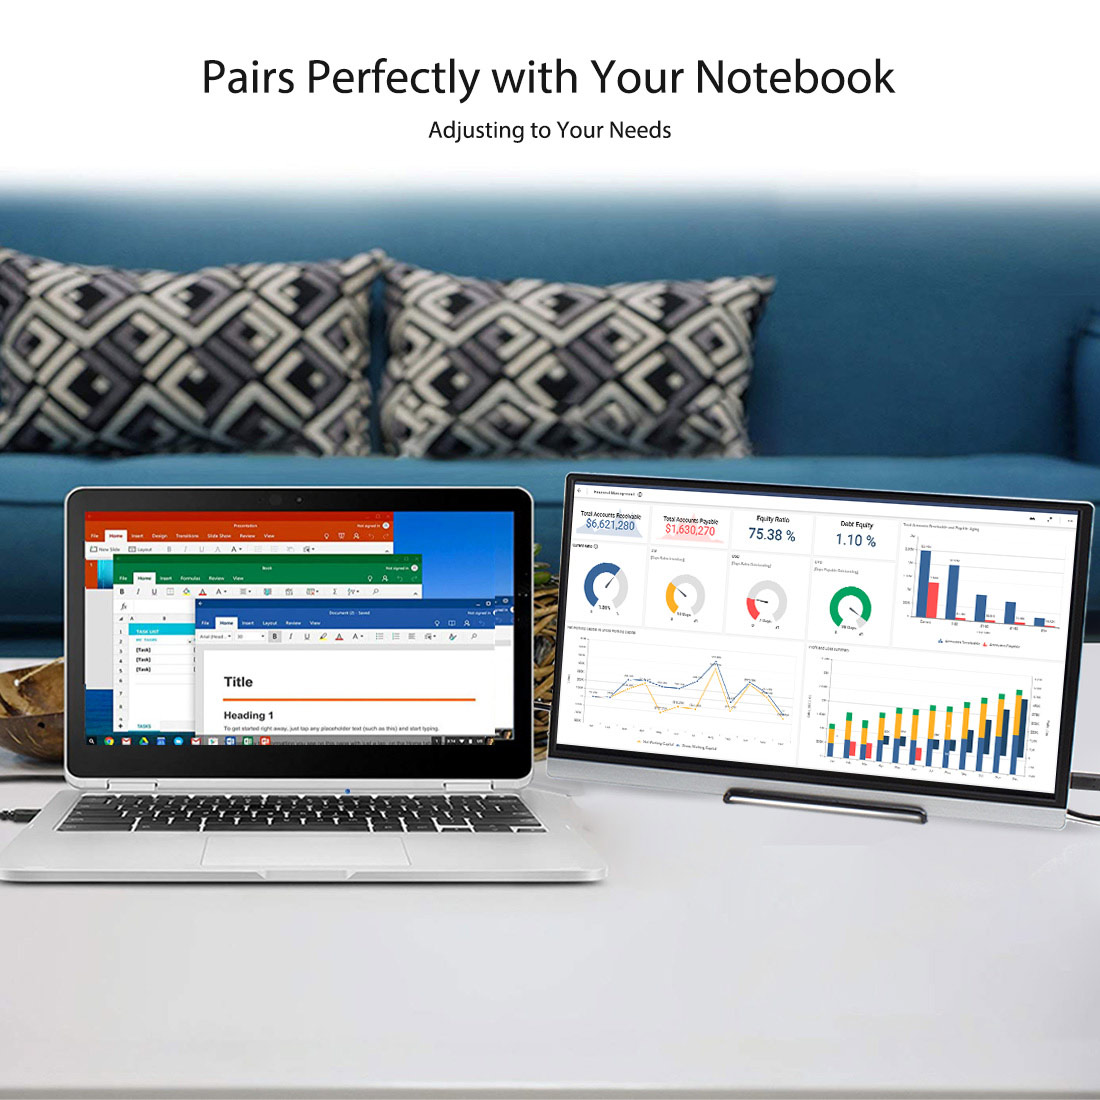 15.6 inch portable display pairs perfectly with your notebook